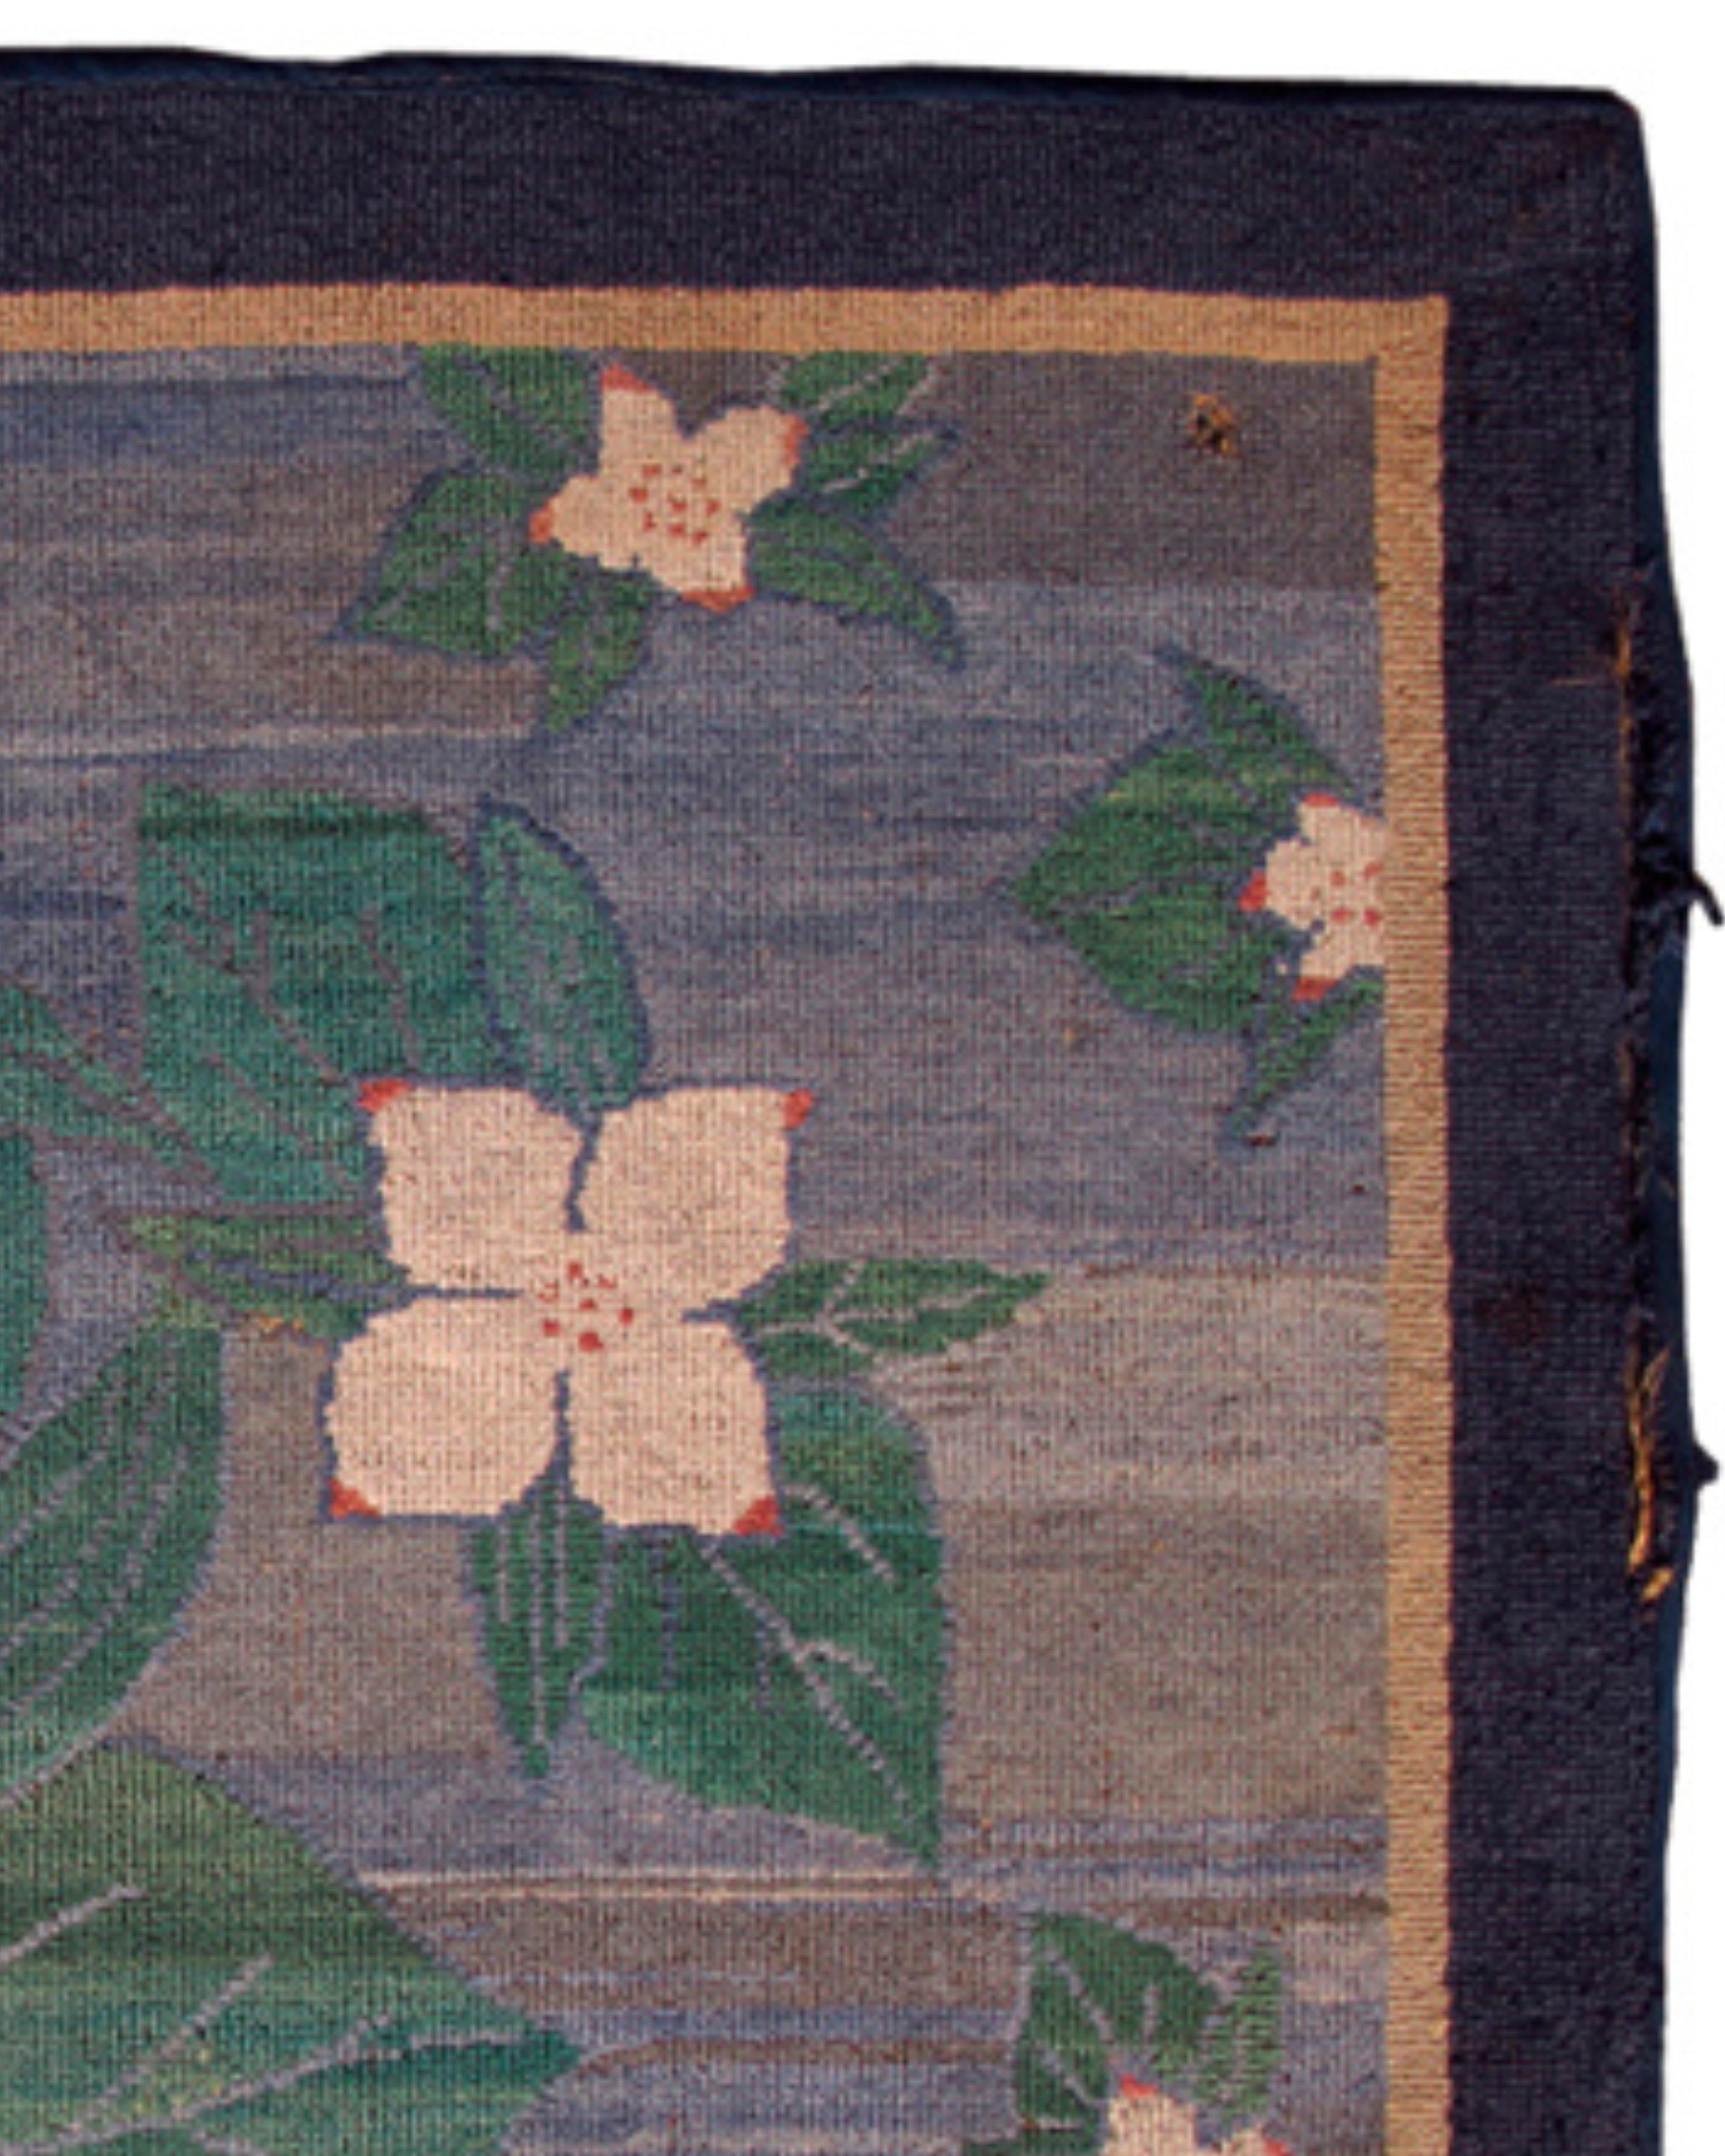 Grenfell Hooked Rug, Early 20th Century

Grenfell hooked mats and rugs are industrial products of the Grenfell Mission, created by Dr. Wilfred T. Grenfell (1865-1940). The roots of mat hooking can be traced back to the founding English and Scottish